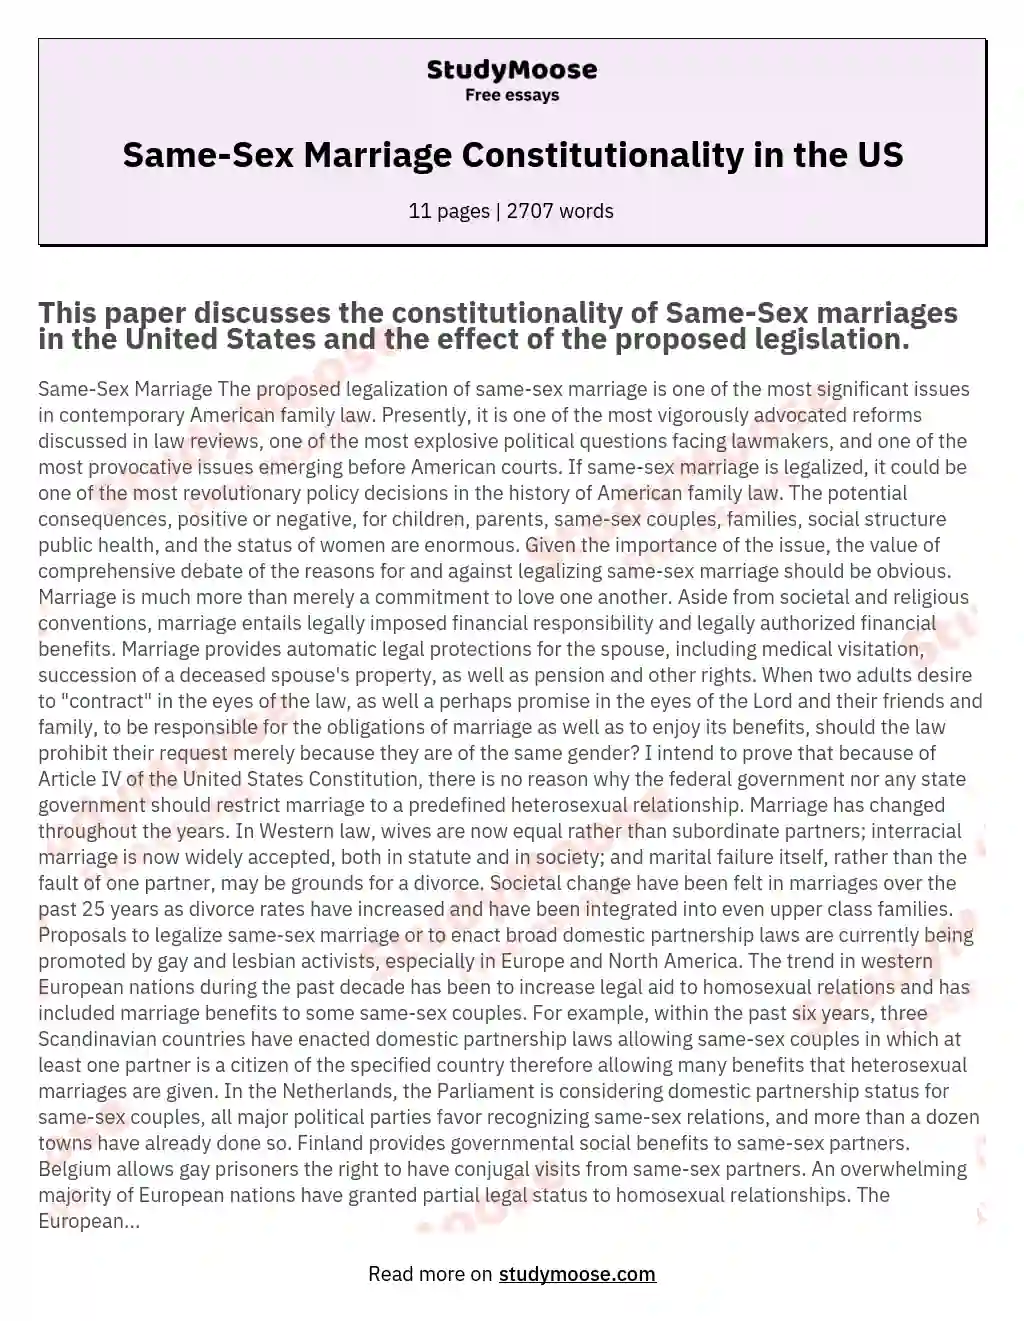 Same-Sex Marriage Constitutionality in the US essay